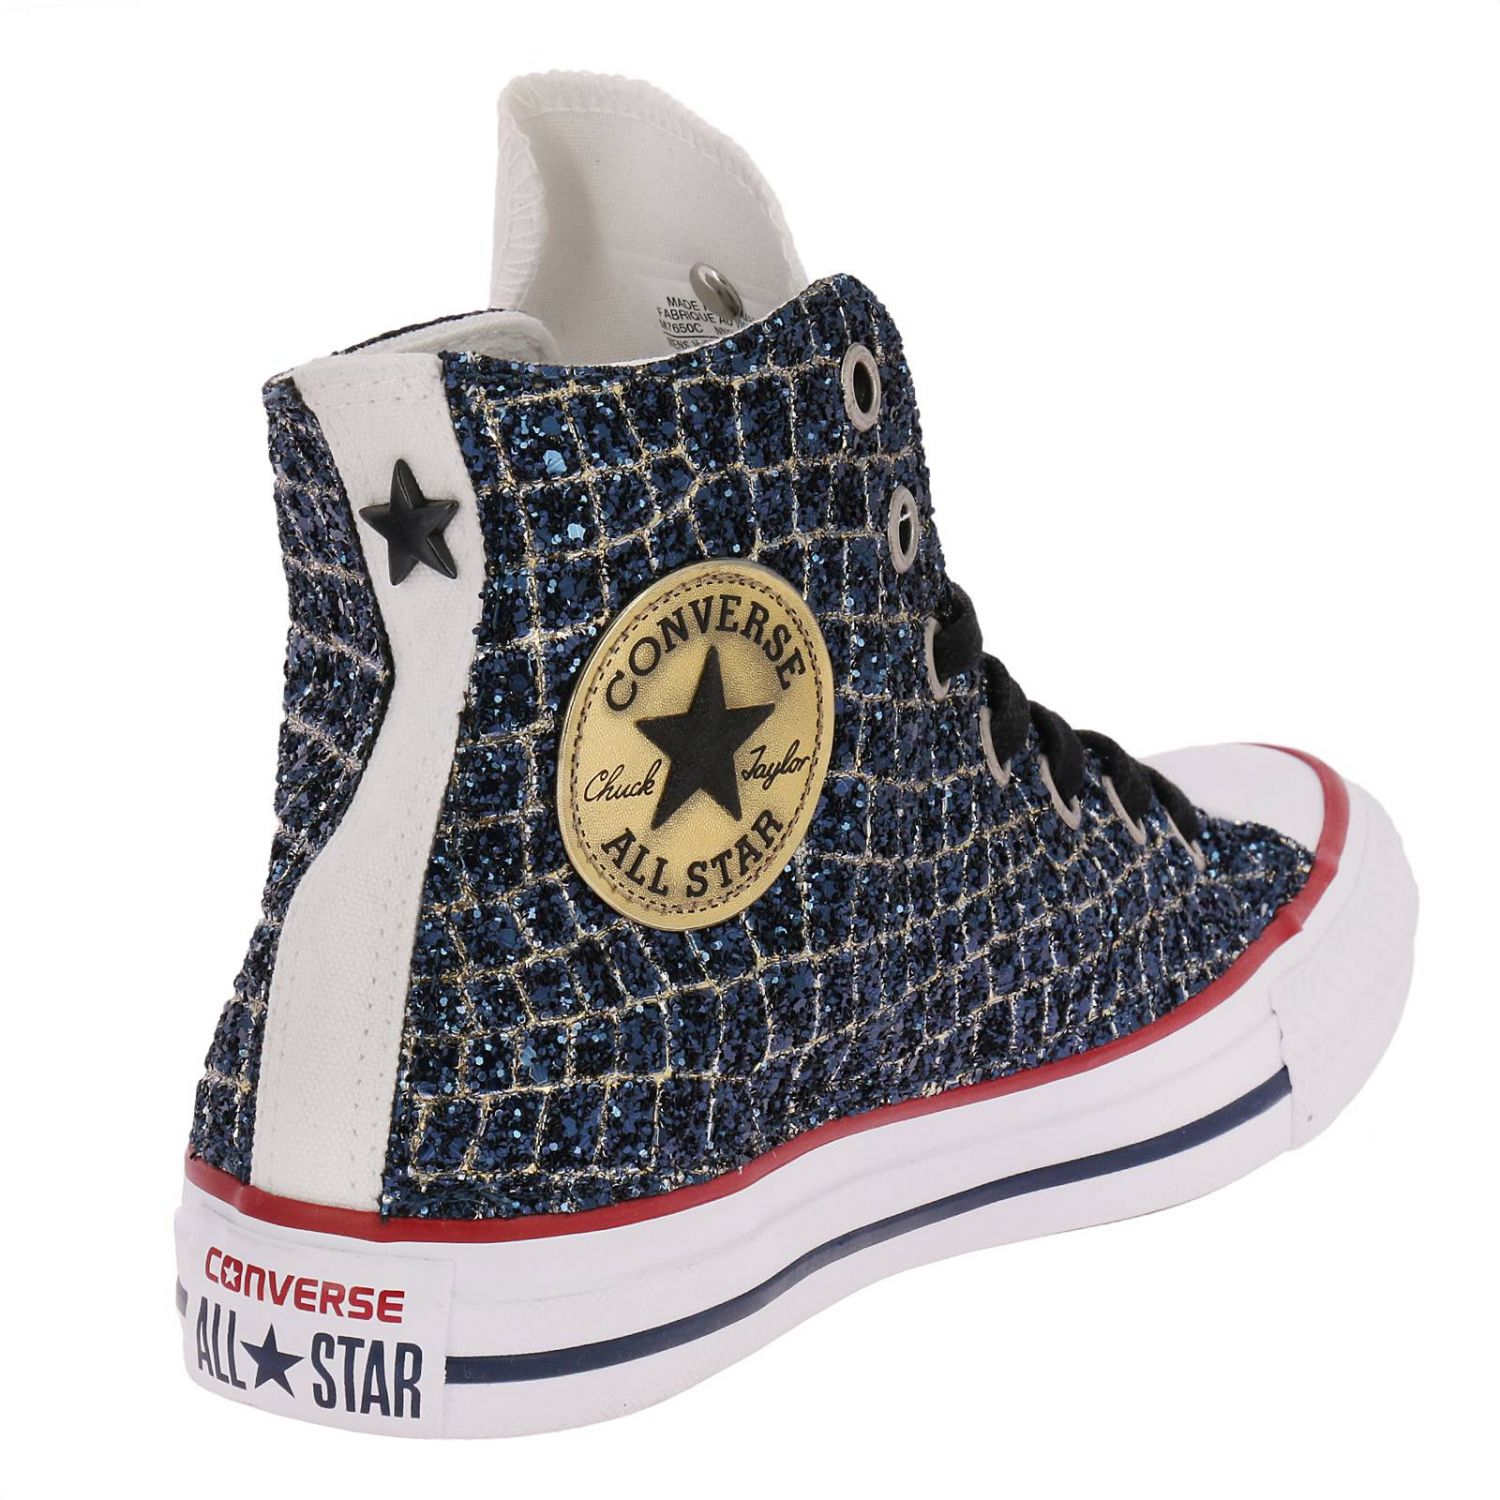 converse bianche limited edition 6000